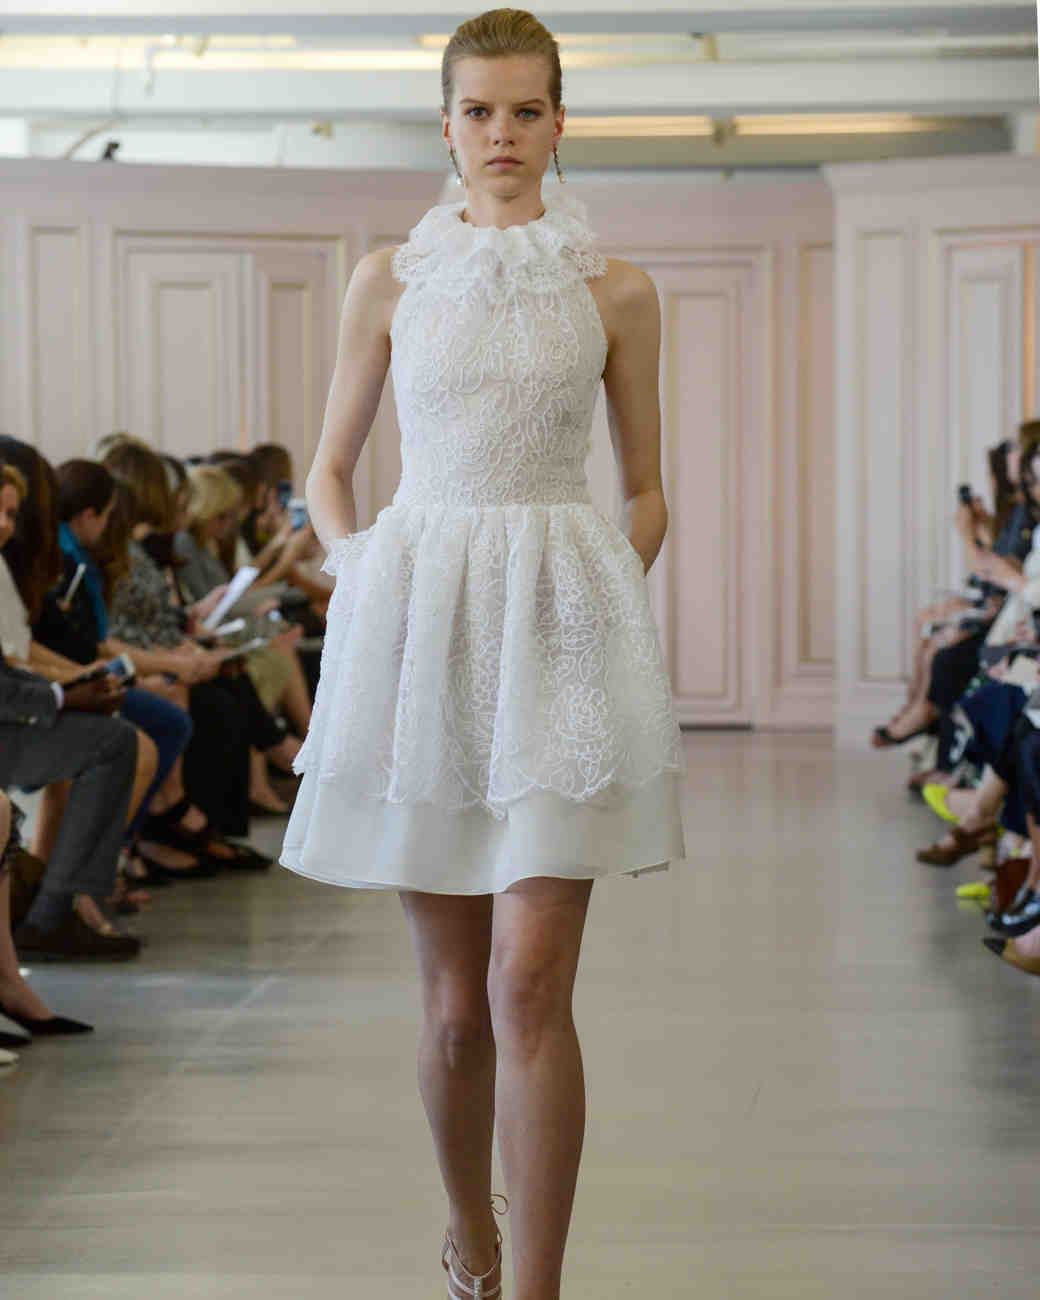 21 Short Wedding Dresses That Go to New Lengths for the Big Day ...